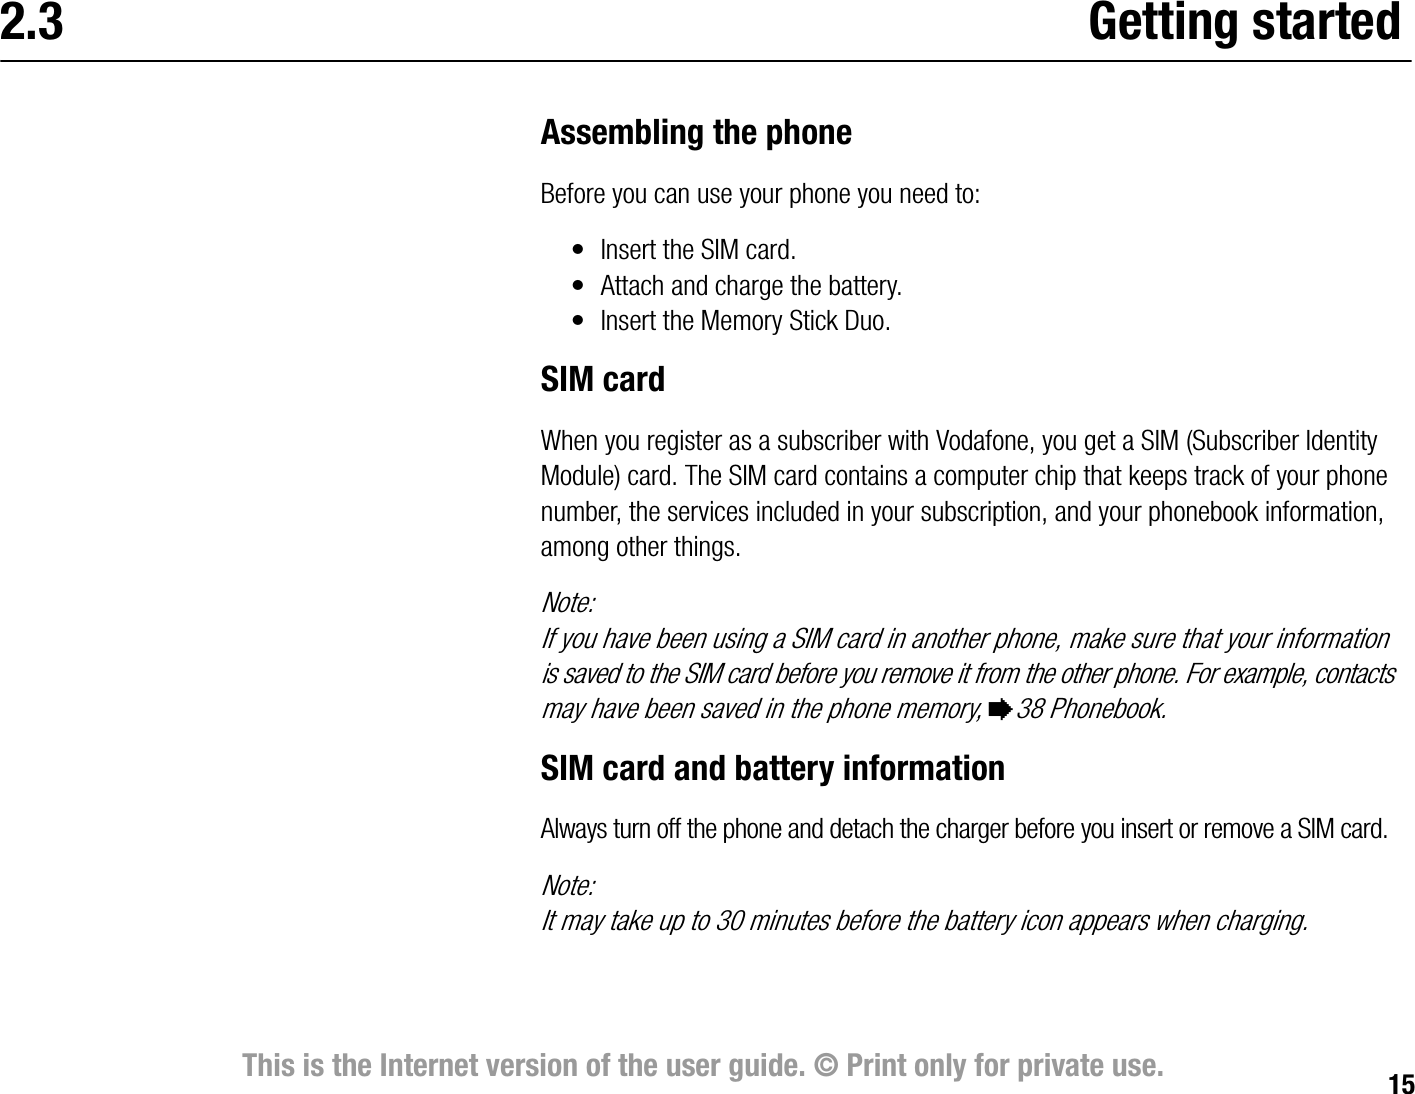 15This is the Internet version of the user guide. © Print only for private use.2.3 Getting startedAssembling the phoneBefore you can use your phone you need to:• Insert the SIM card.• Attach and charge the battery.• Insert the Memory Stick Duo.SIM cardWhen you register as a subscriber with Vodafone, you get a SIM (Subscriber Identity Module) card. The SIM card contains a computer chip that keeps track of your phone number, the services included in your subscription, and your phonebook information, among other things.Note:If you have been using a SIM card in another phone, make sure that your information is saved to the SIM card before you remove it from the other phone. For example, contacts may have been saved in the phone memory, %38 Phonebook.SIM card and battery informationAlways turn off the phone and detach the charger before you insert or remove a SIM card.Note:It may take up to 30 minutes before the battery icon appears when charging.